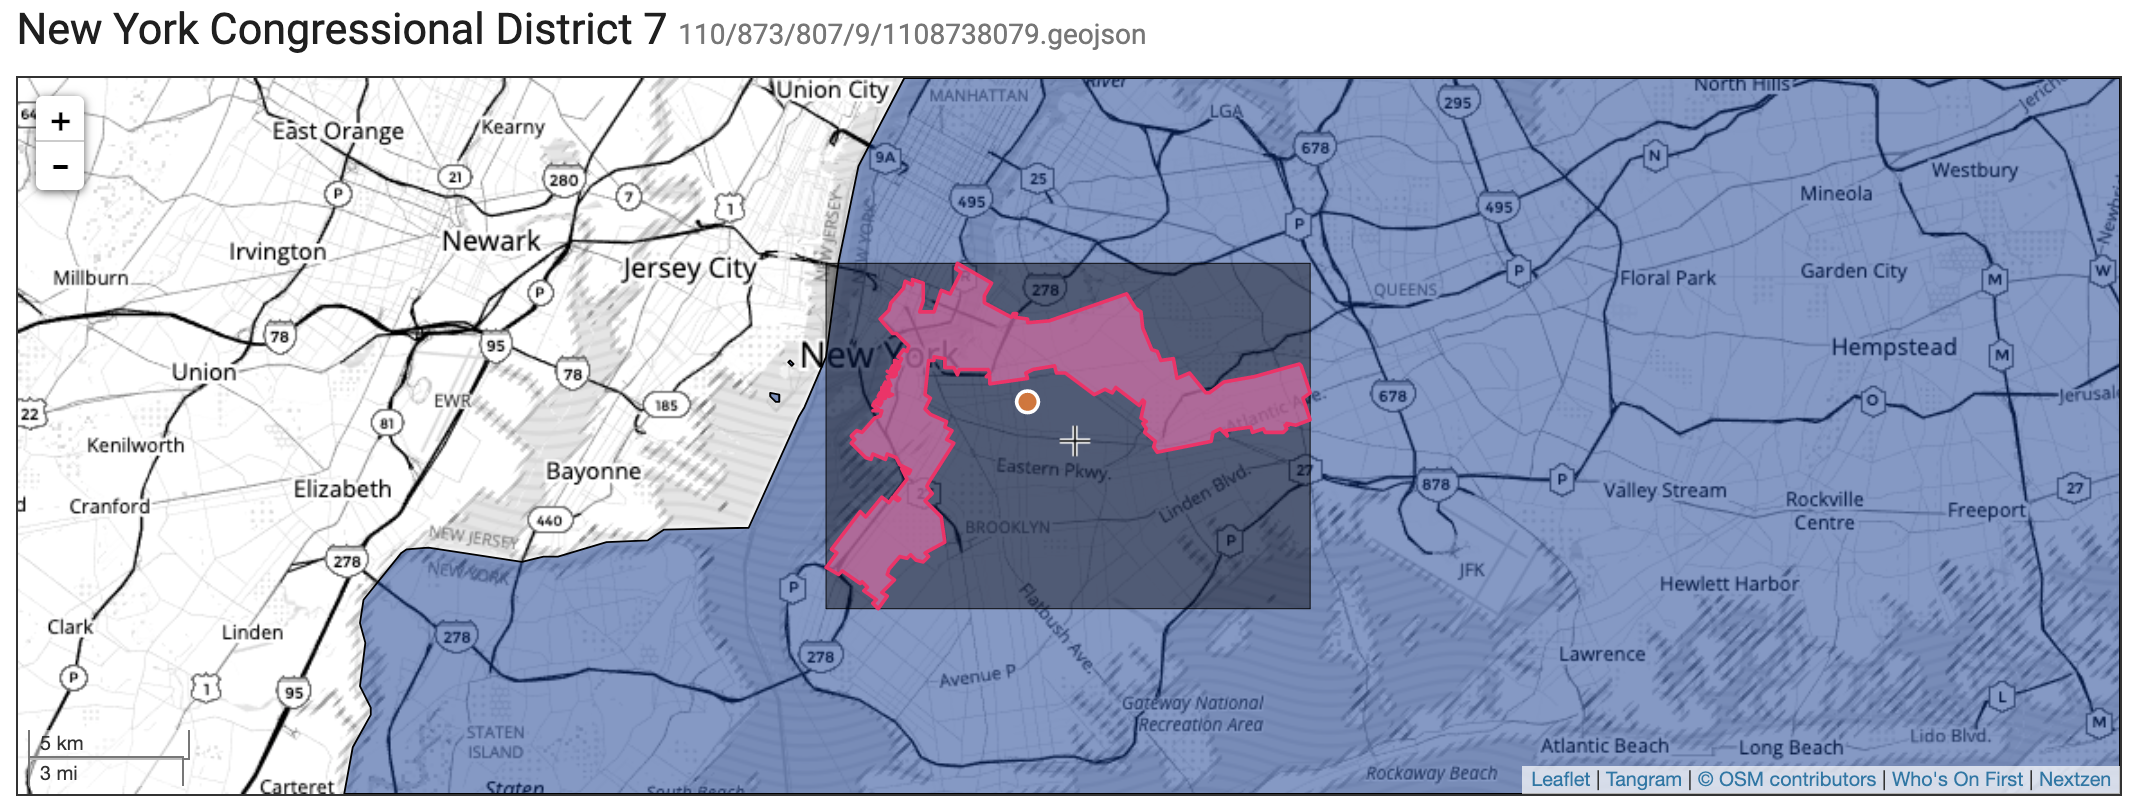 Who's On First congressional boundary for NY07